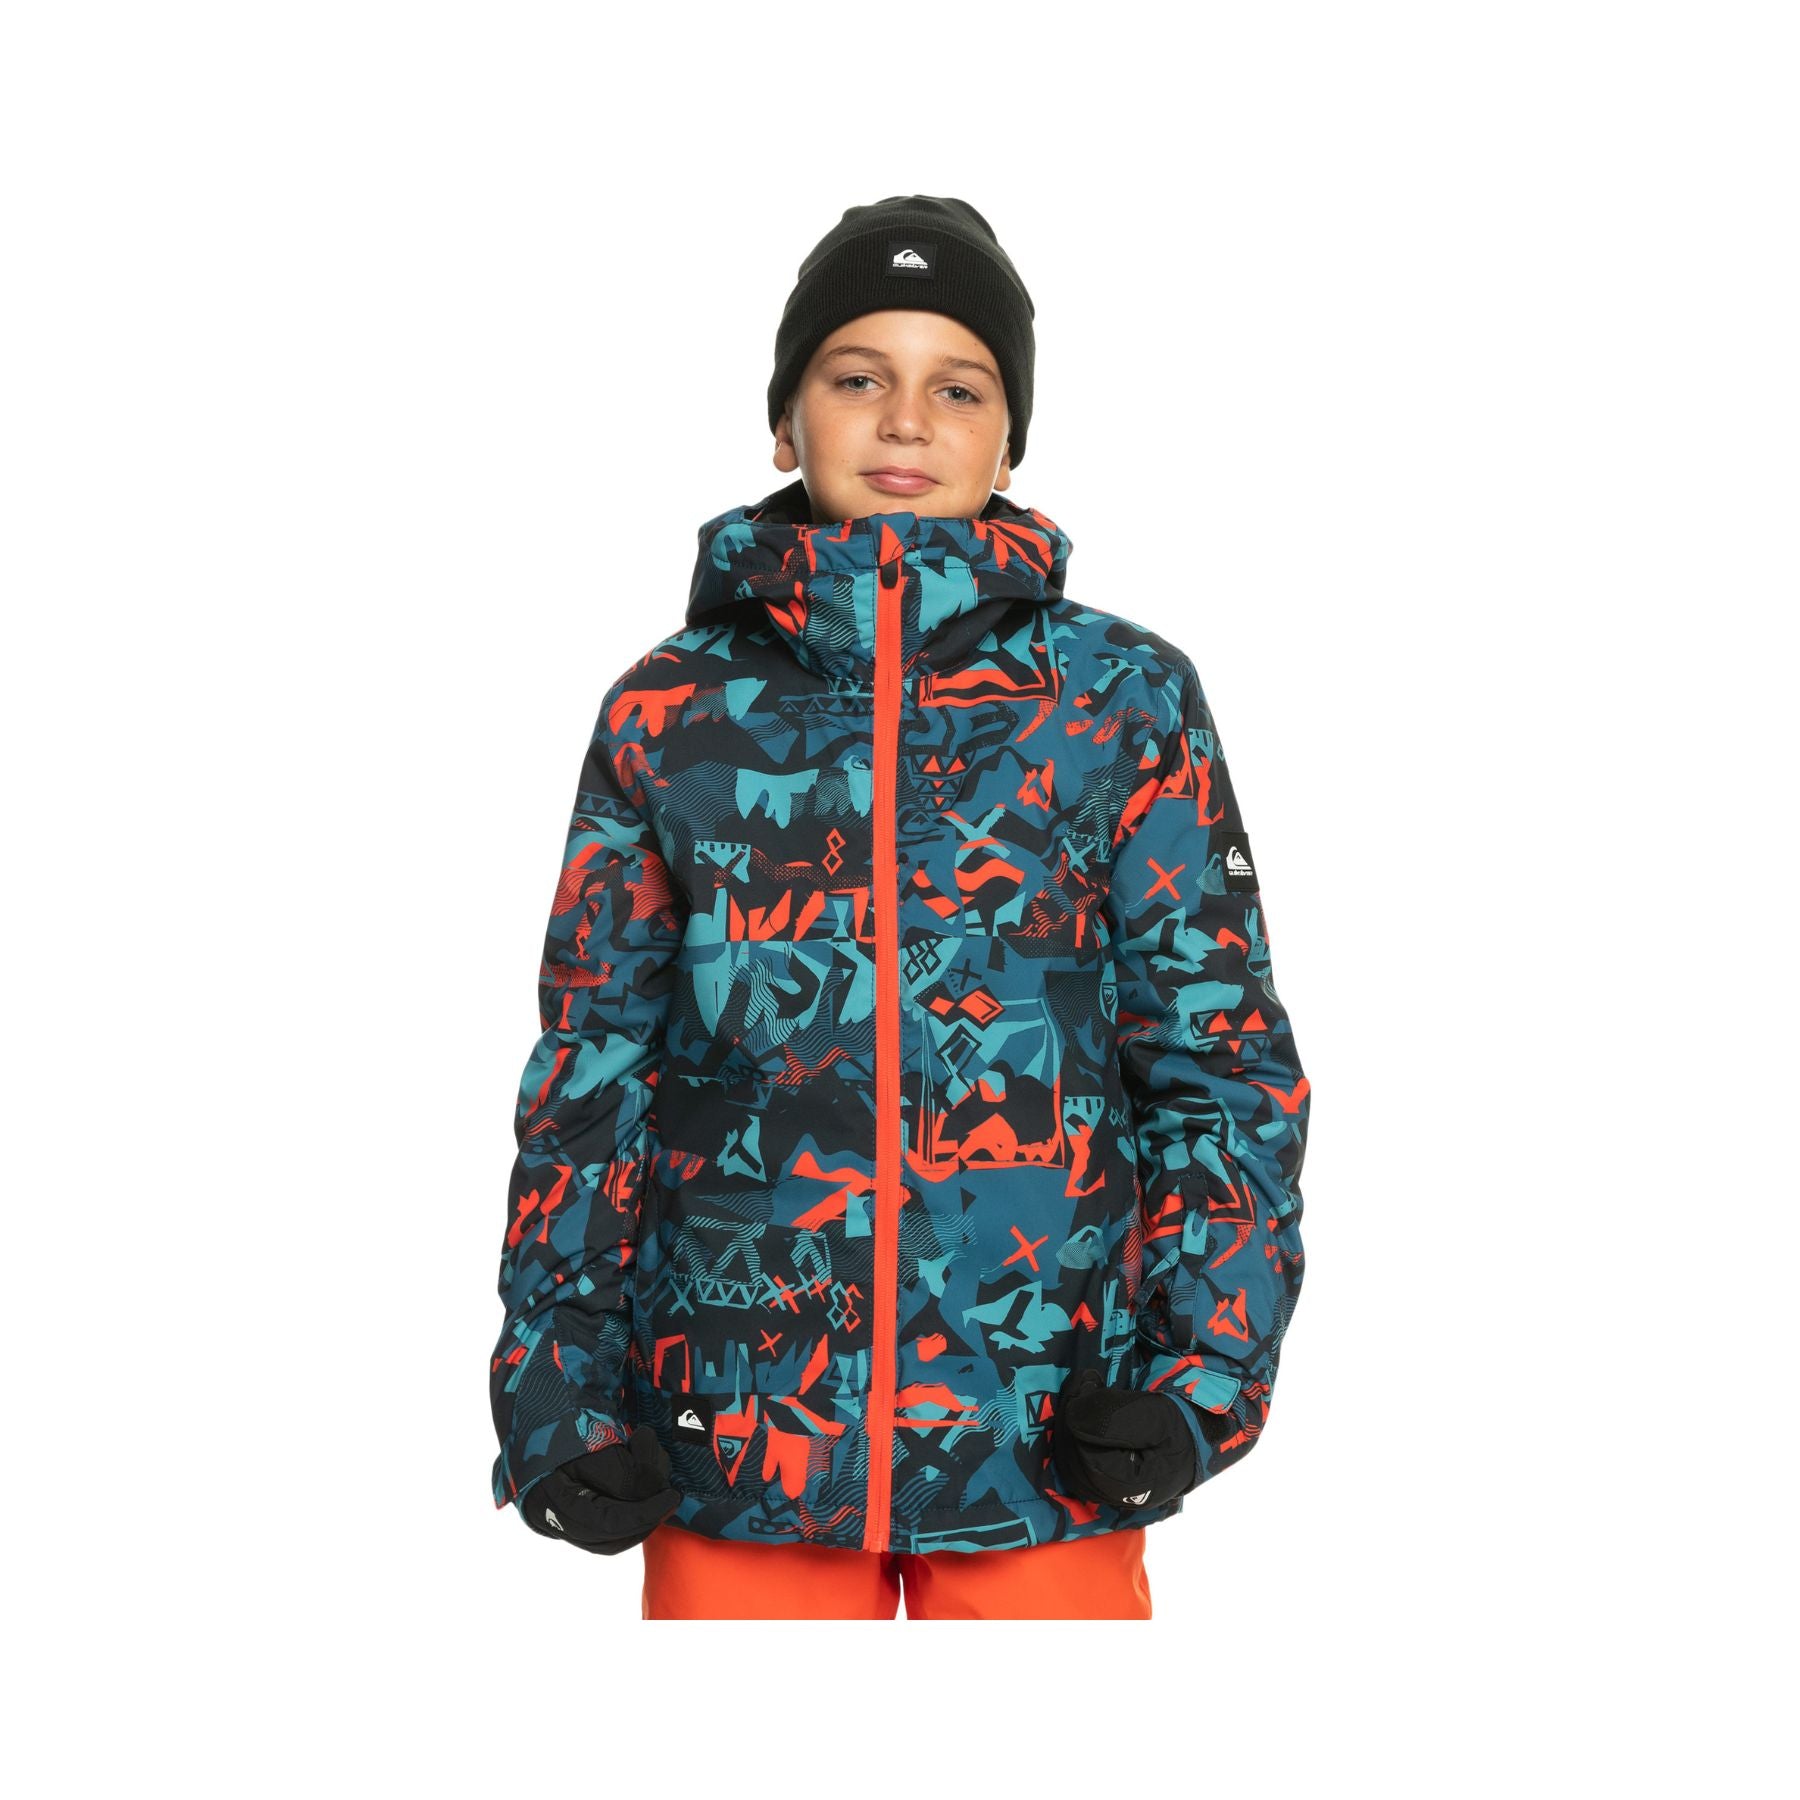 Quiksilver Mission Printed Youth Jacket in Building Mountains GR